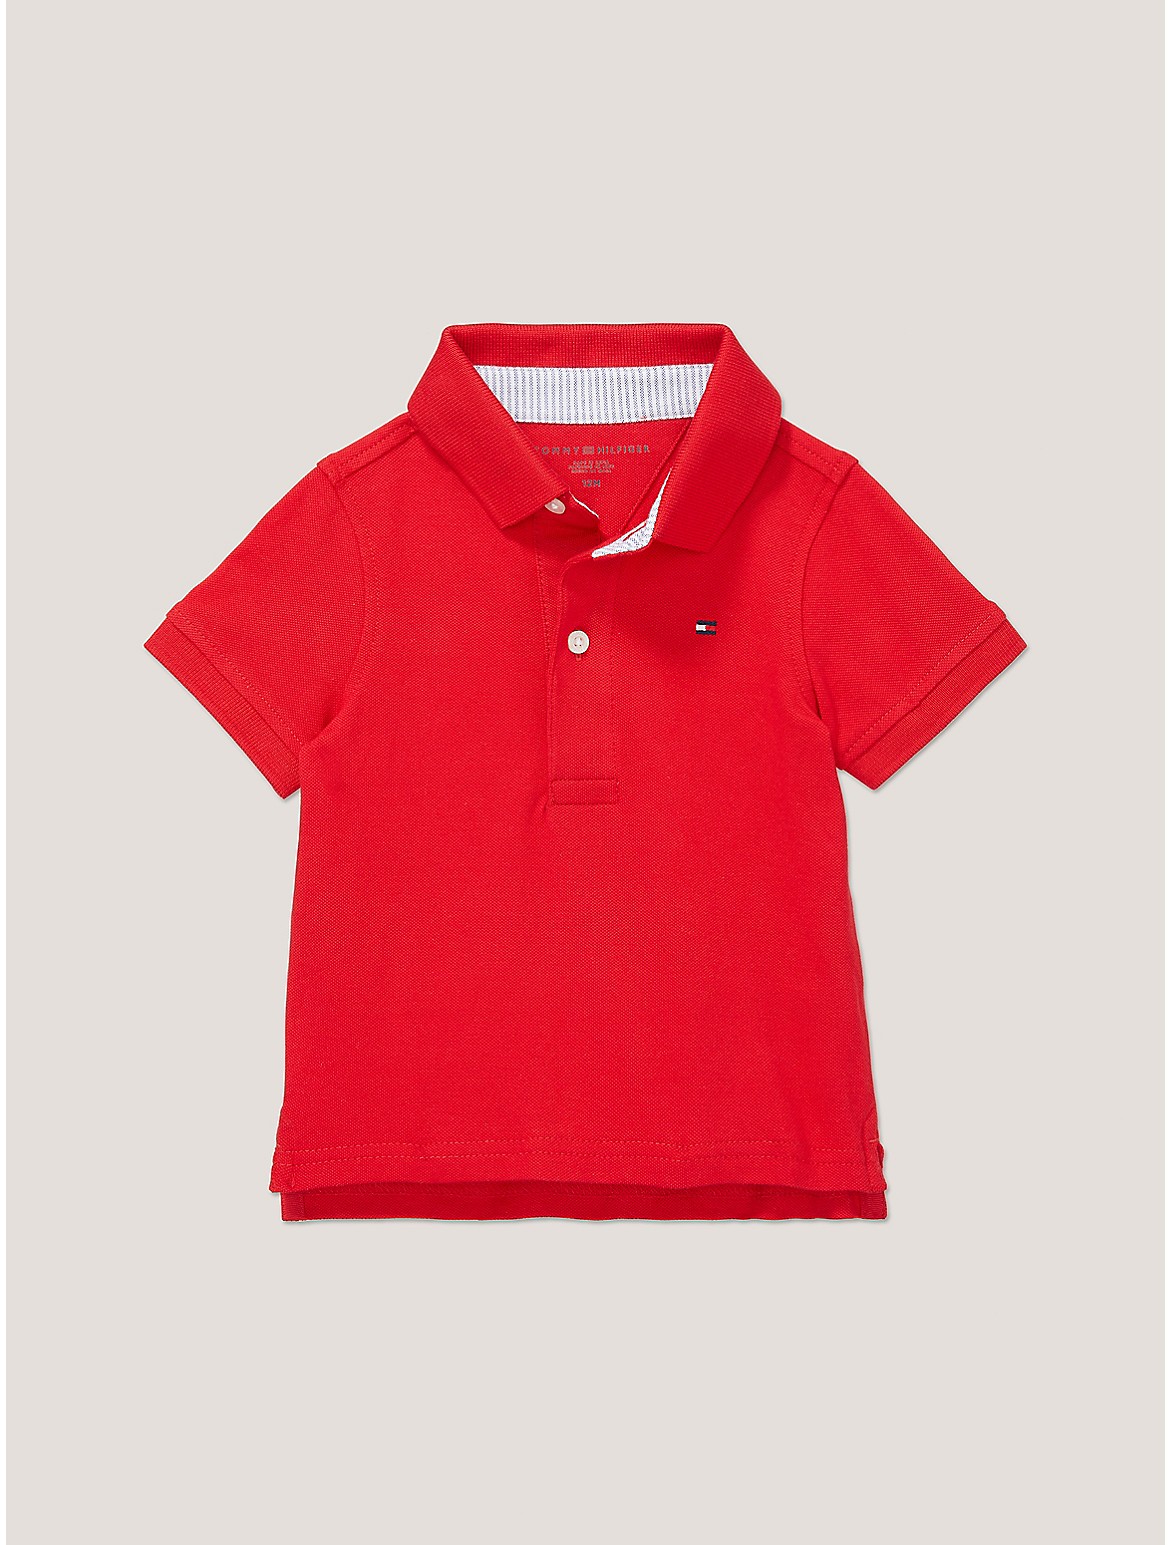 Tommy Hilfiger Boys' Babies' Solid Stretch Polo - Red - 18M